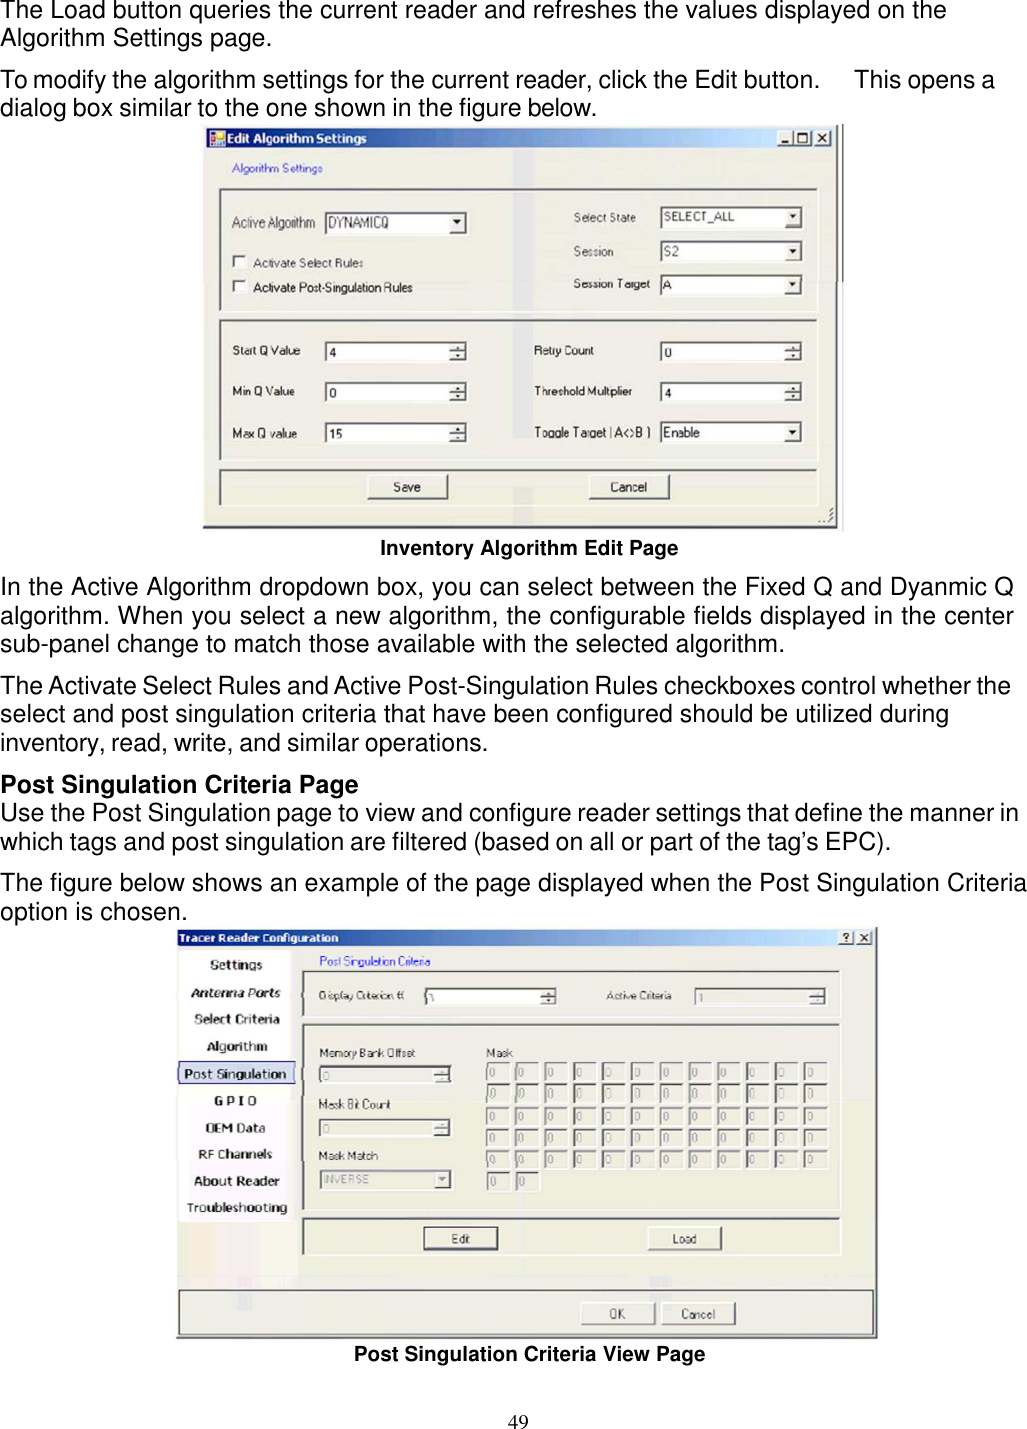 49    The Load button queries the current reader and refreshes the values displayed on the Algorithm Settings page. To modify the algorithm settings for the current reader, click the Edit button.  This opens a dialog box similar to the one shown in the figure below.  Inventory Algorithm Edit Page In the Active Algorithm dropdown box, you can select between the Fixed Q and Dyanmic Q algorithm. When you select a new algorithm, the configurable fields displayed in the center sub-panel change to match those available with the selected algorithm. The Activate Select Rules and Active Post-Singulation Rules checkboxes control whether the select and post singulation criteria that have been configured should be utilized during inventory, read, write, and similar operations. Post Singulation Criteria Page Use the Post Singulation page to view and configure reader settings that define the manner in which tags and post singulation are filtered (based on all or part of the tag’s EPC). The figure below shows an example of the page displayed when the Post Singulation Criteria option is chosen.  Post Singulation Criteria View Page 